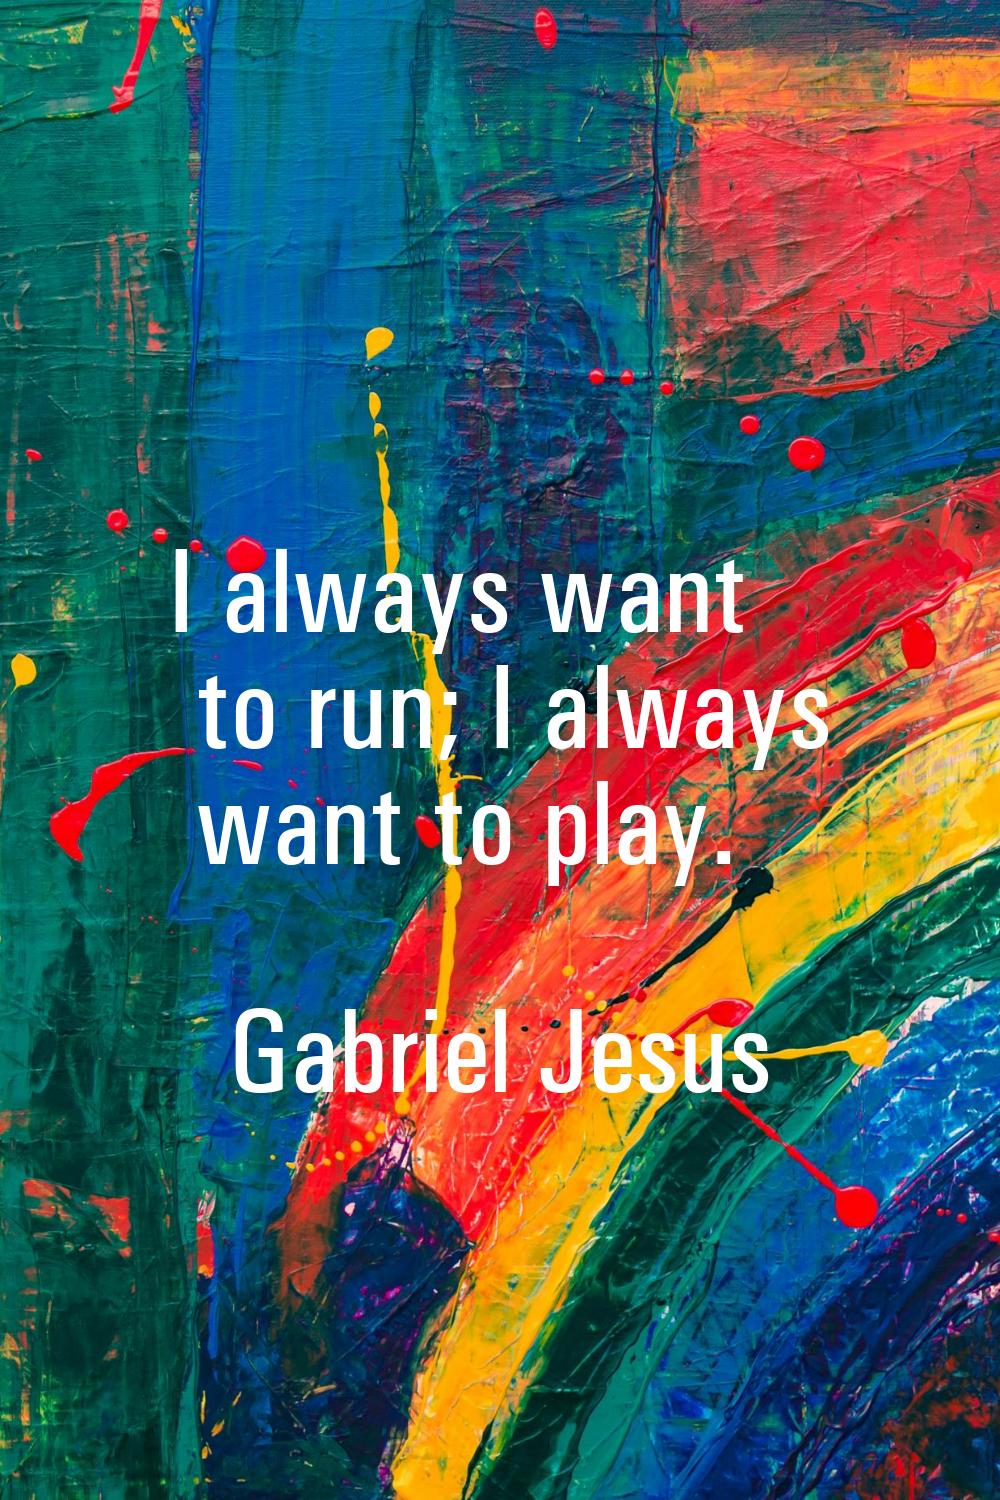 I always want to run; I always want to play.